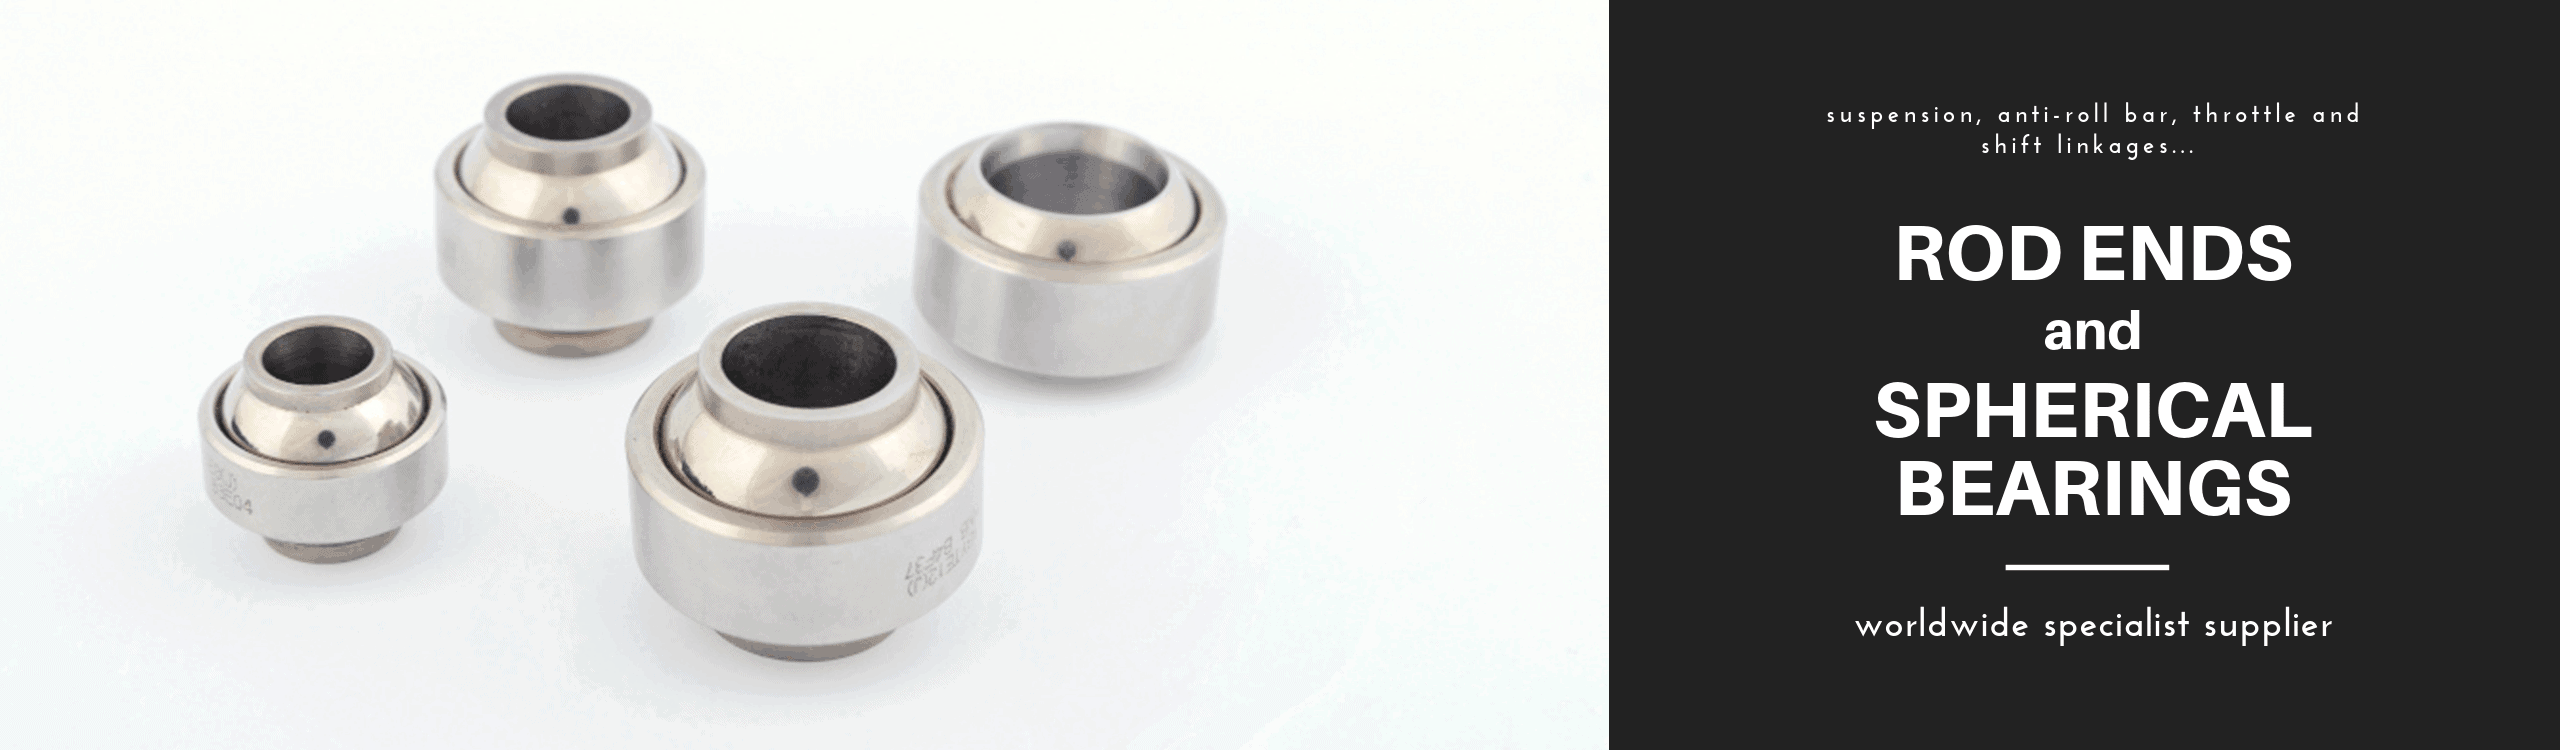 rod ends and spherical bearings for suspension, anti-roll bar, throttle and shift linkages